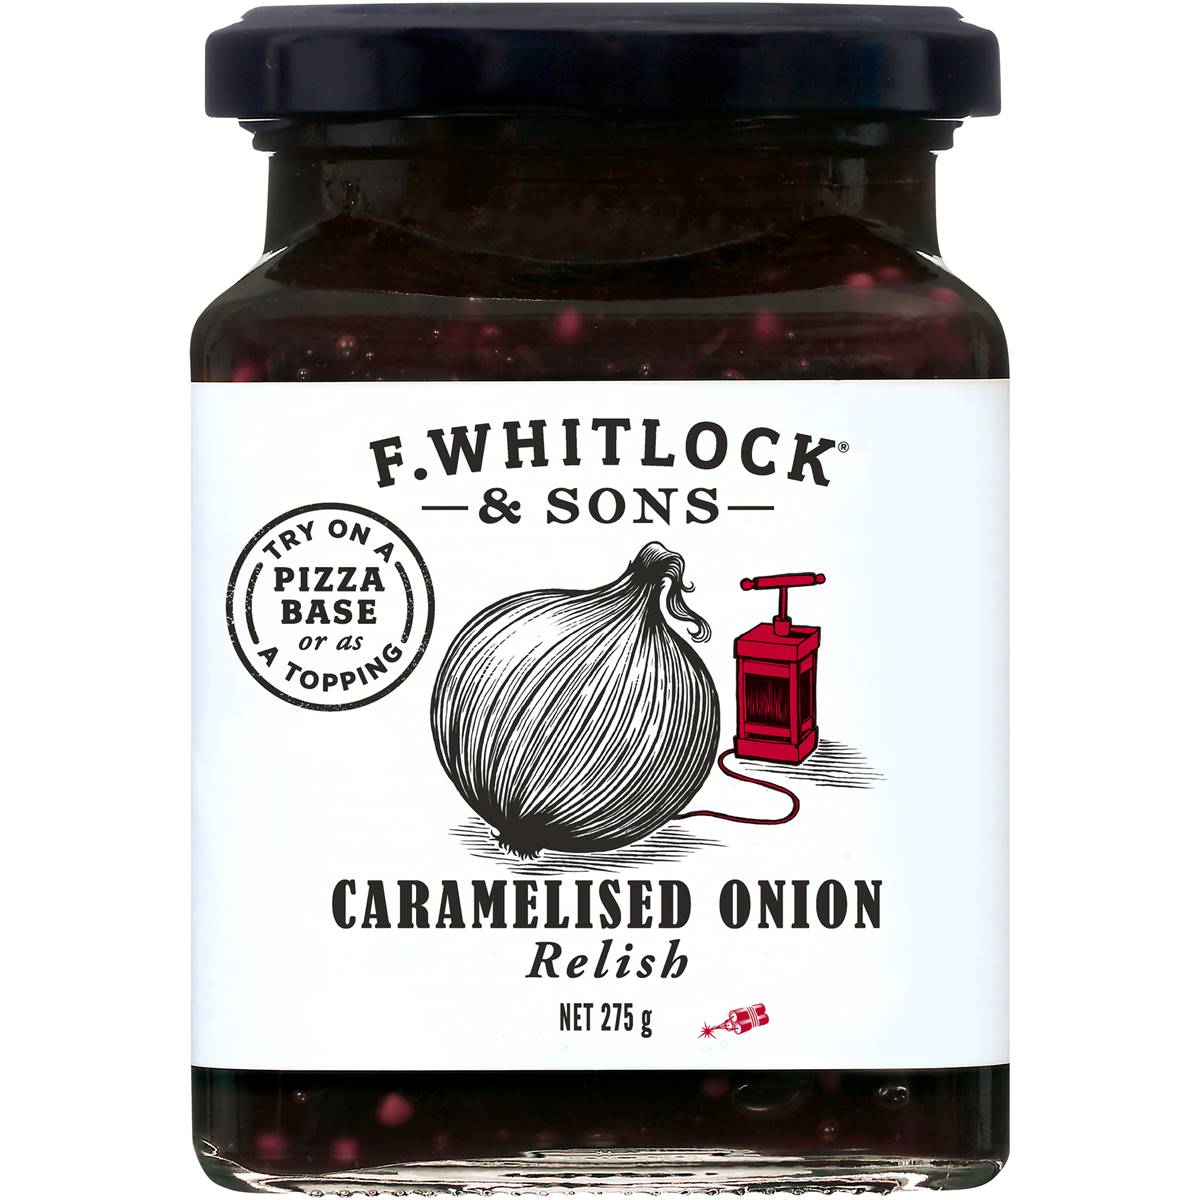 Calories in F. Whitlock & Sons Caramelised Onion Relish